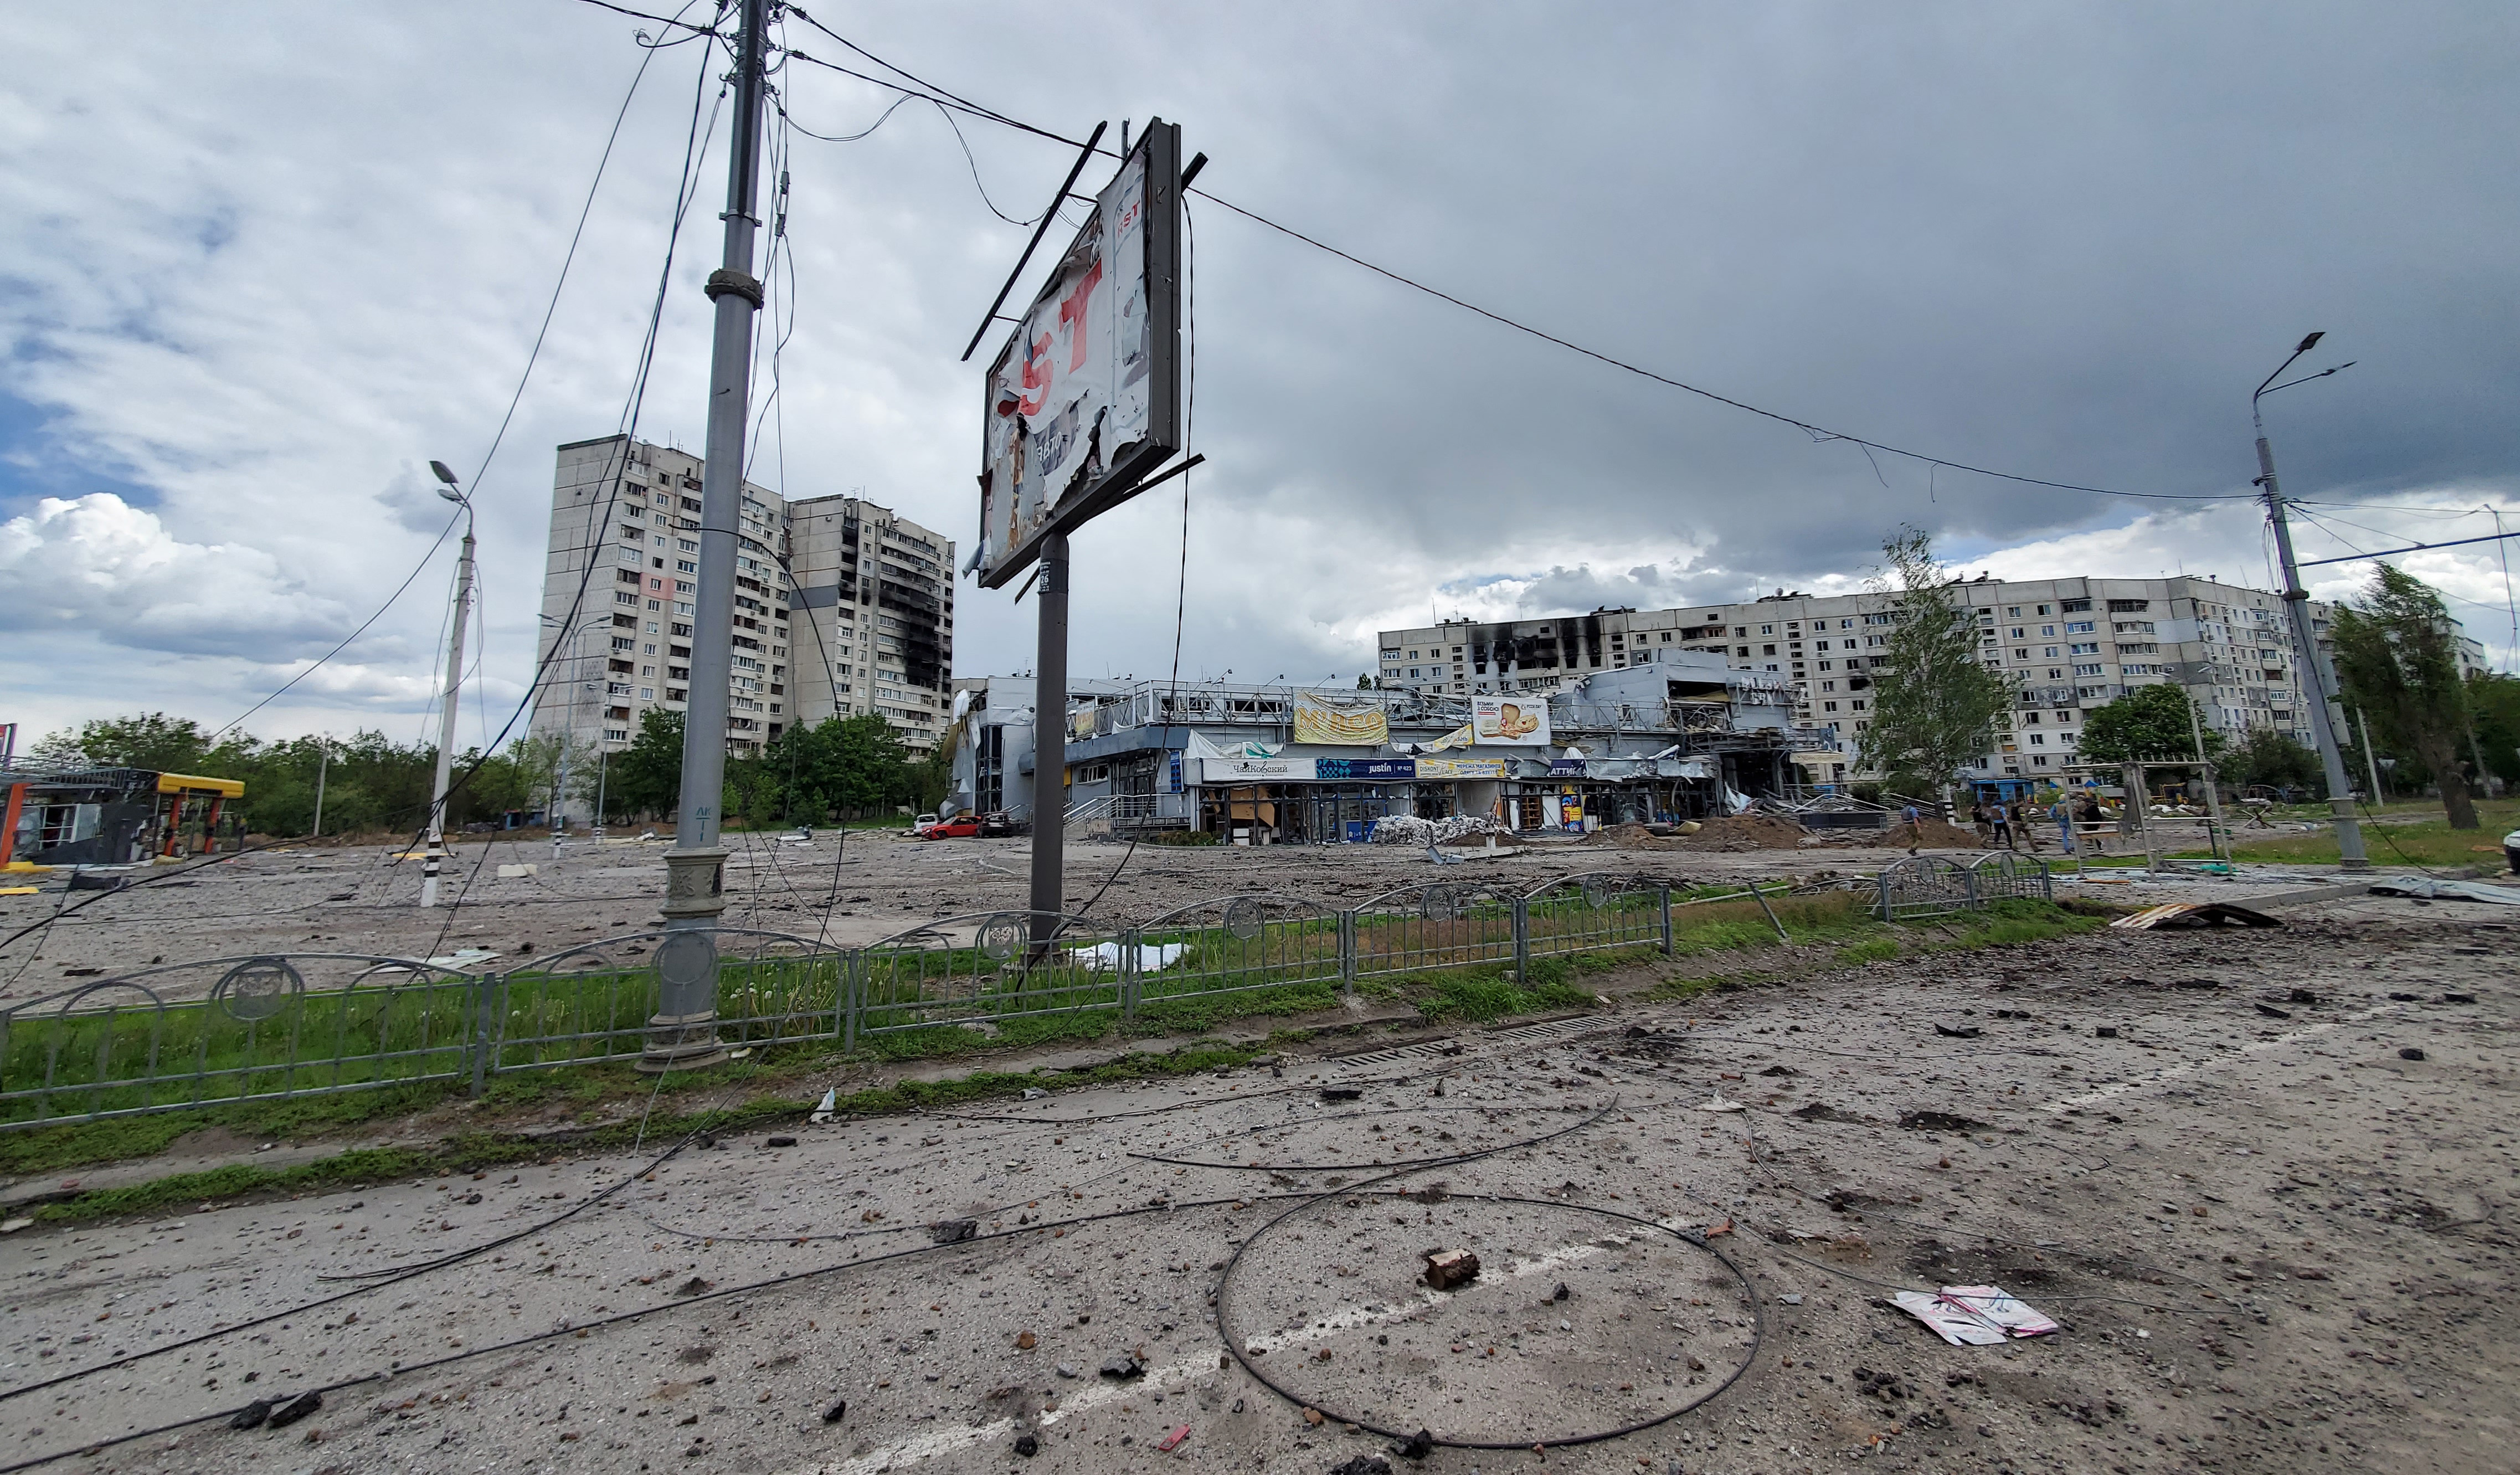 A street in Kharkiv shows buildings and road surfaces damaged by shelling